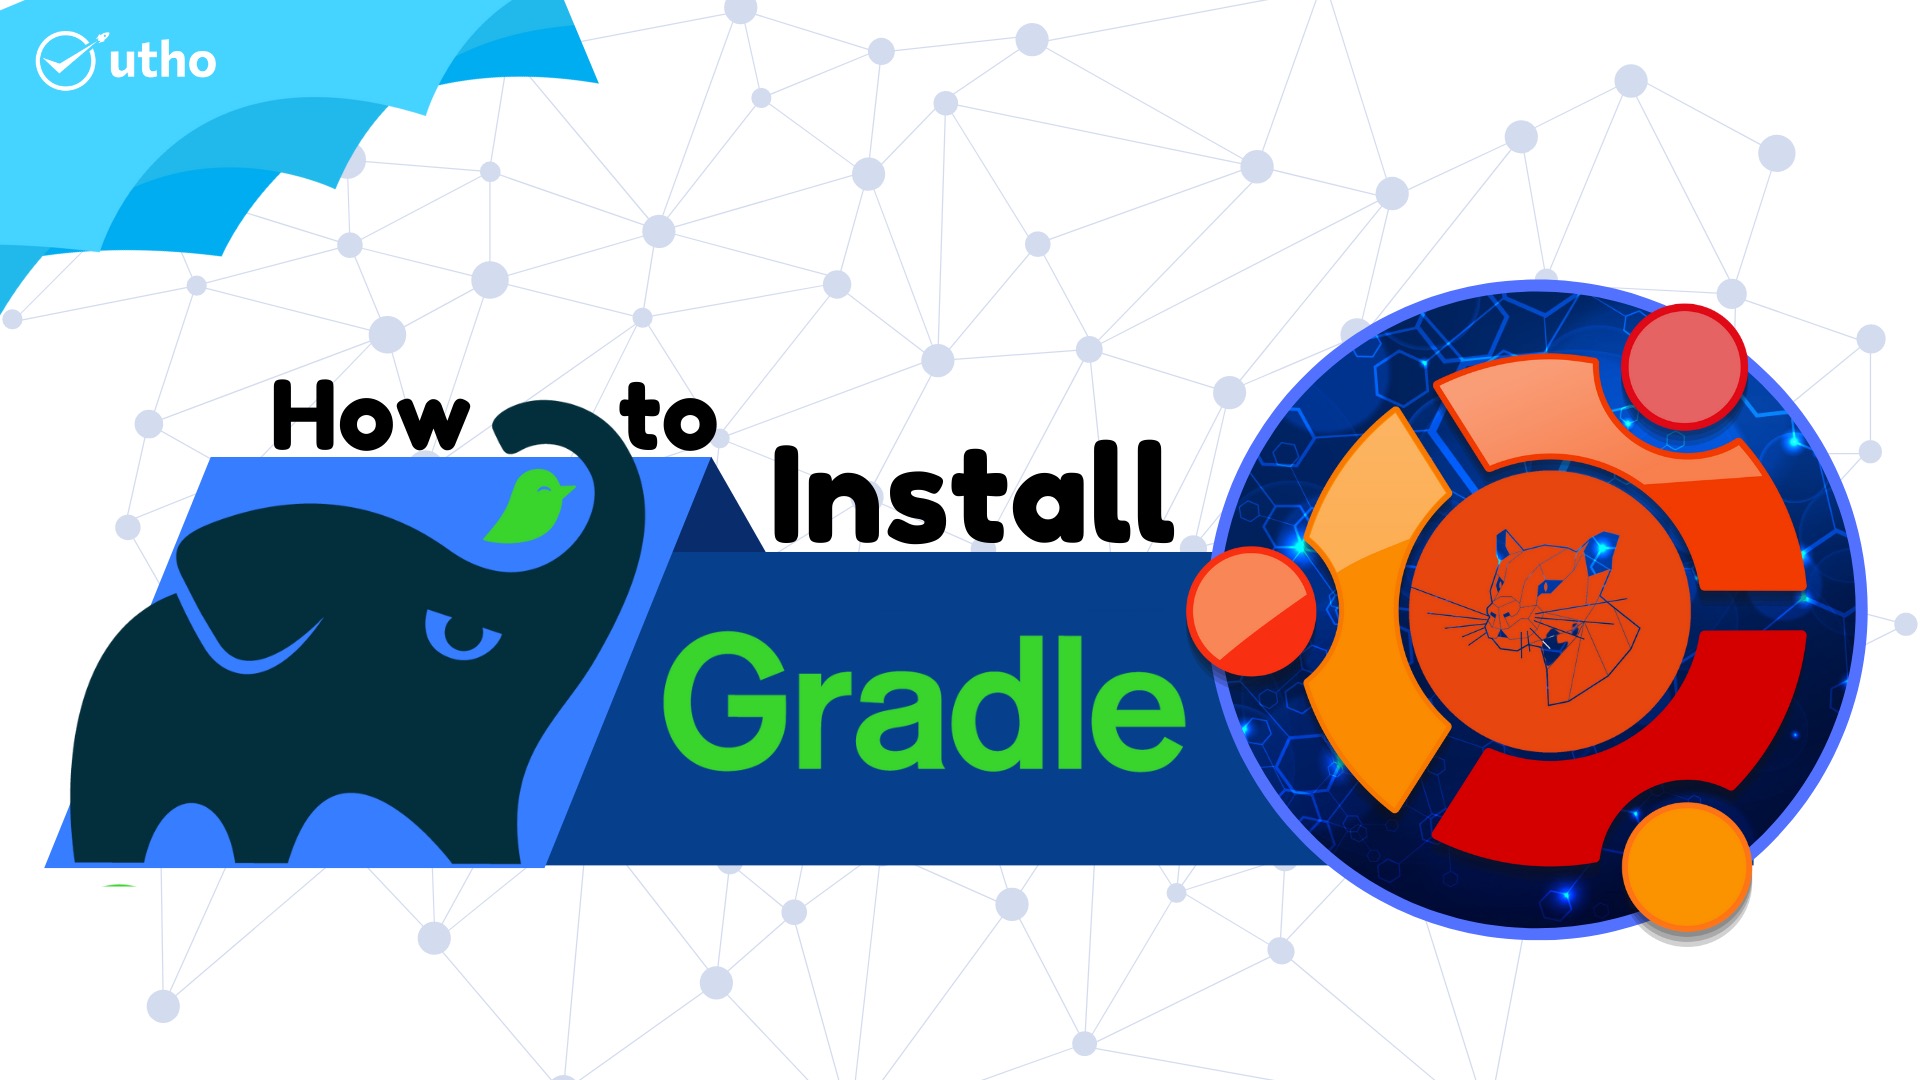 How to install Gradle on CentOS 7